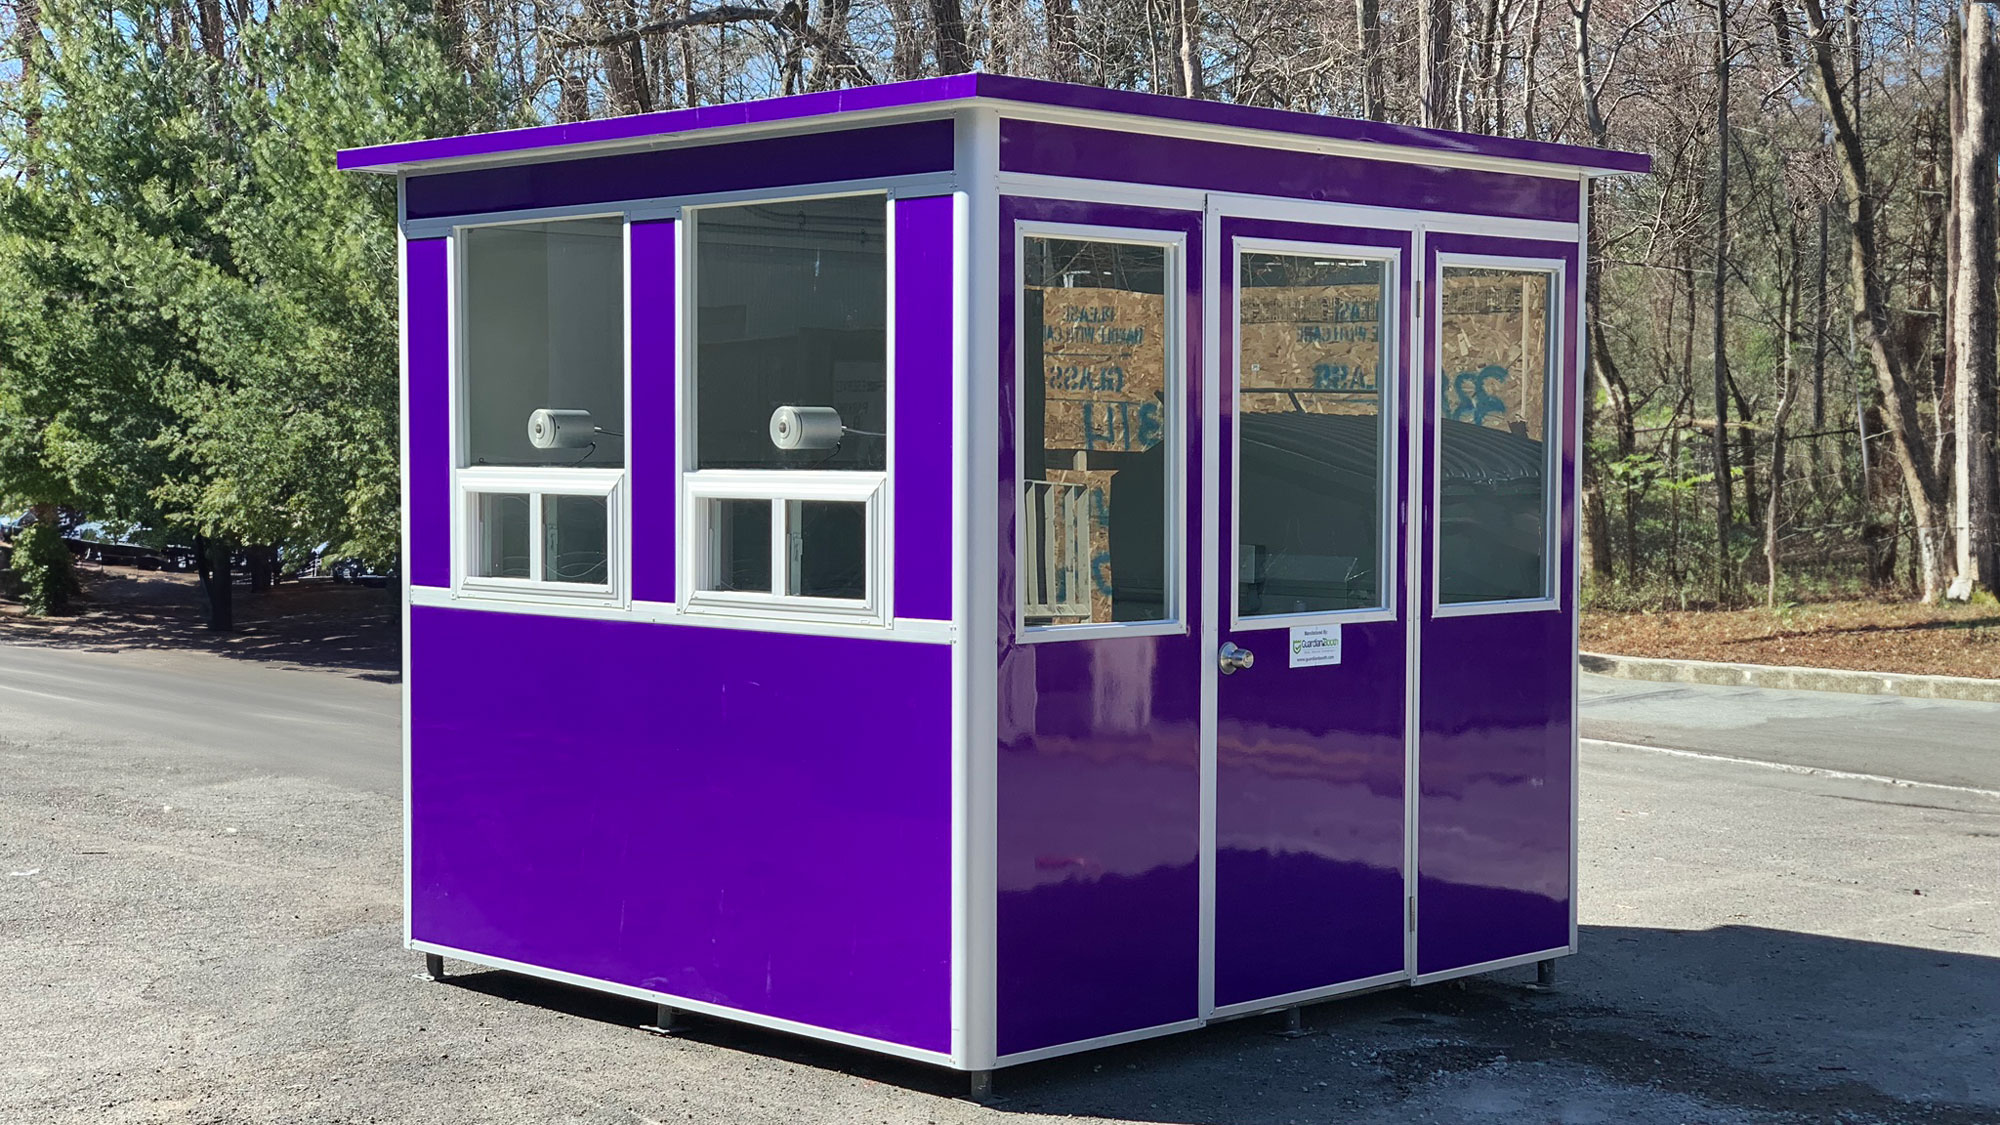 8x8-Ticket-Booth-in-Montverde,-FL-with-Ticket-Window-with-speaking-hole,-full-size-closeable-transaction-slot),-and-Custom-Exterior-Wrap-1